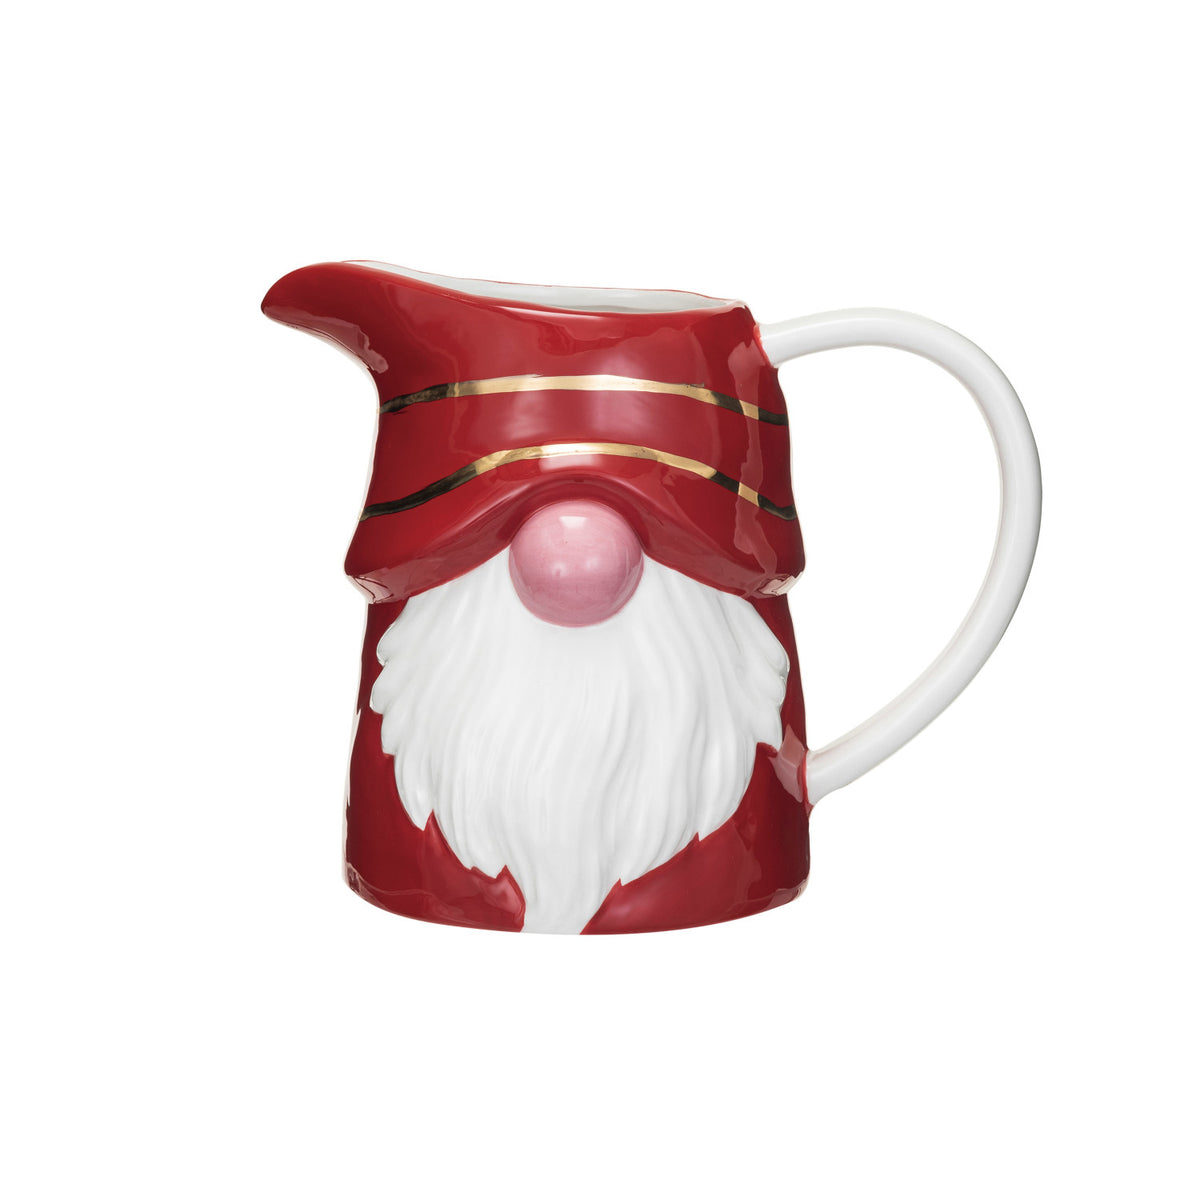 1 Quart Ceramic Gnome Pitcher w/ Gold Electroplating, Red & White